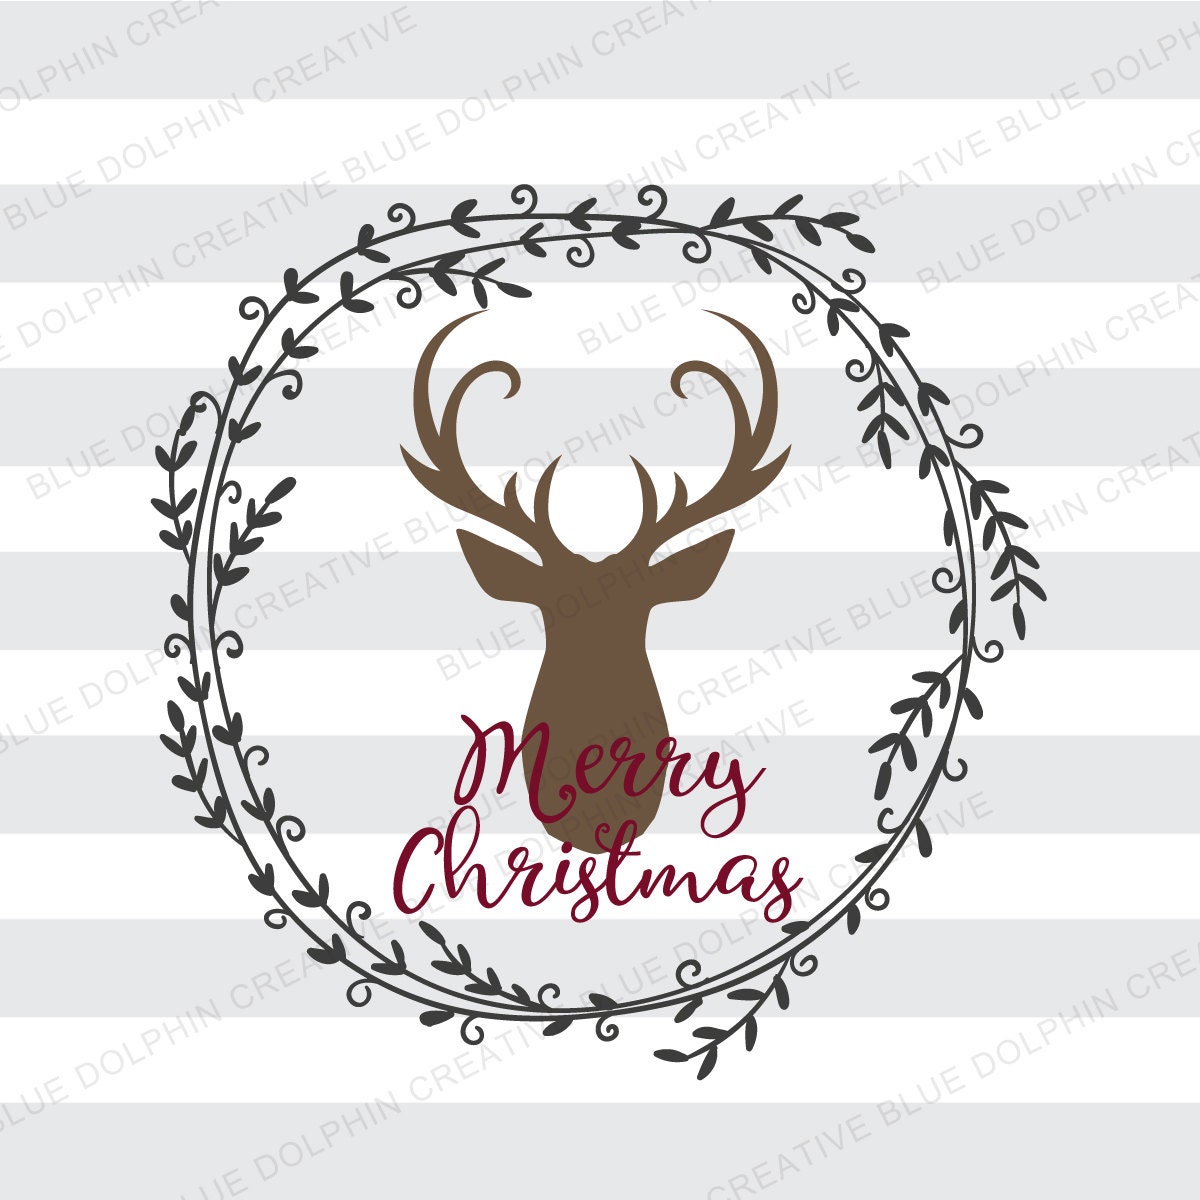 Download Rustic Merry Christmas with deer wreath SVG DXF png pdf jpg